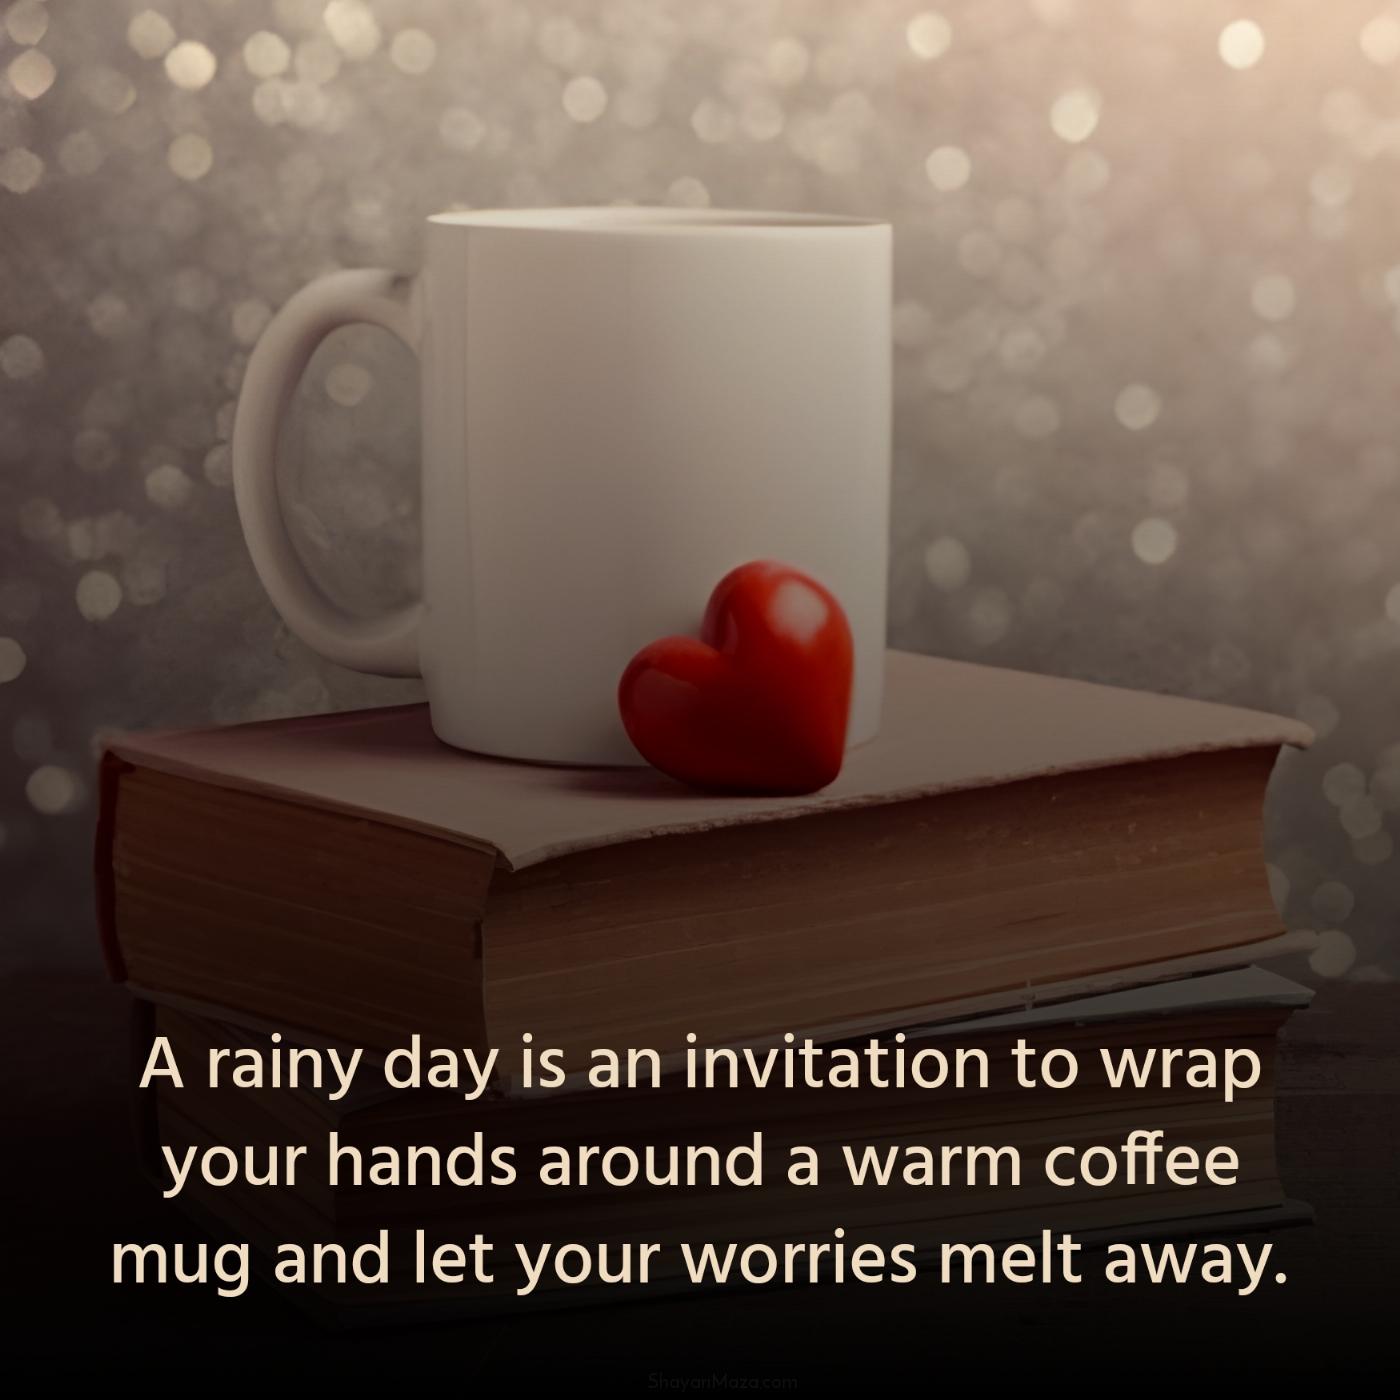 A rainy day is an invitation to wrap your hands around a warm coffee mug